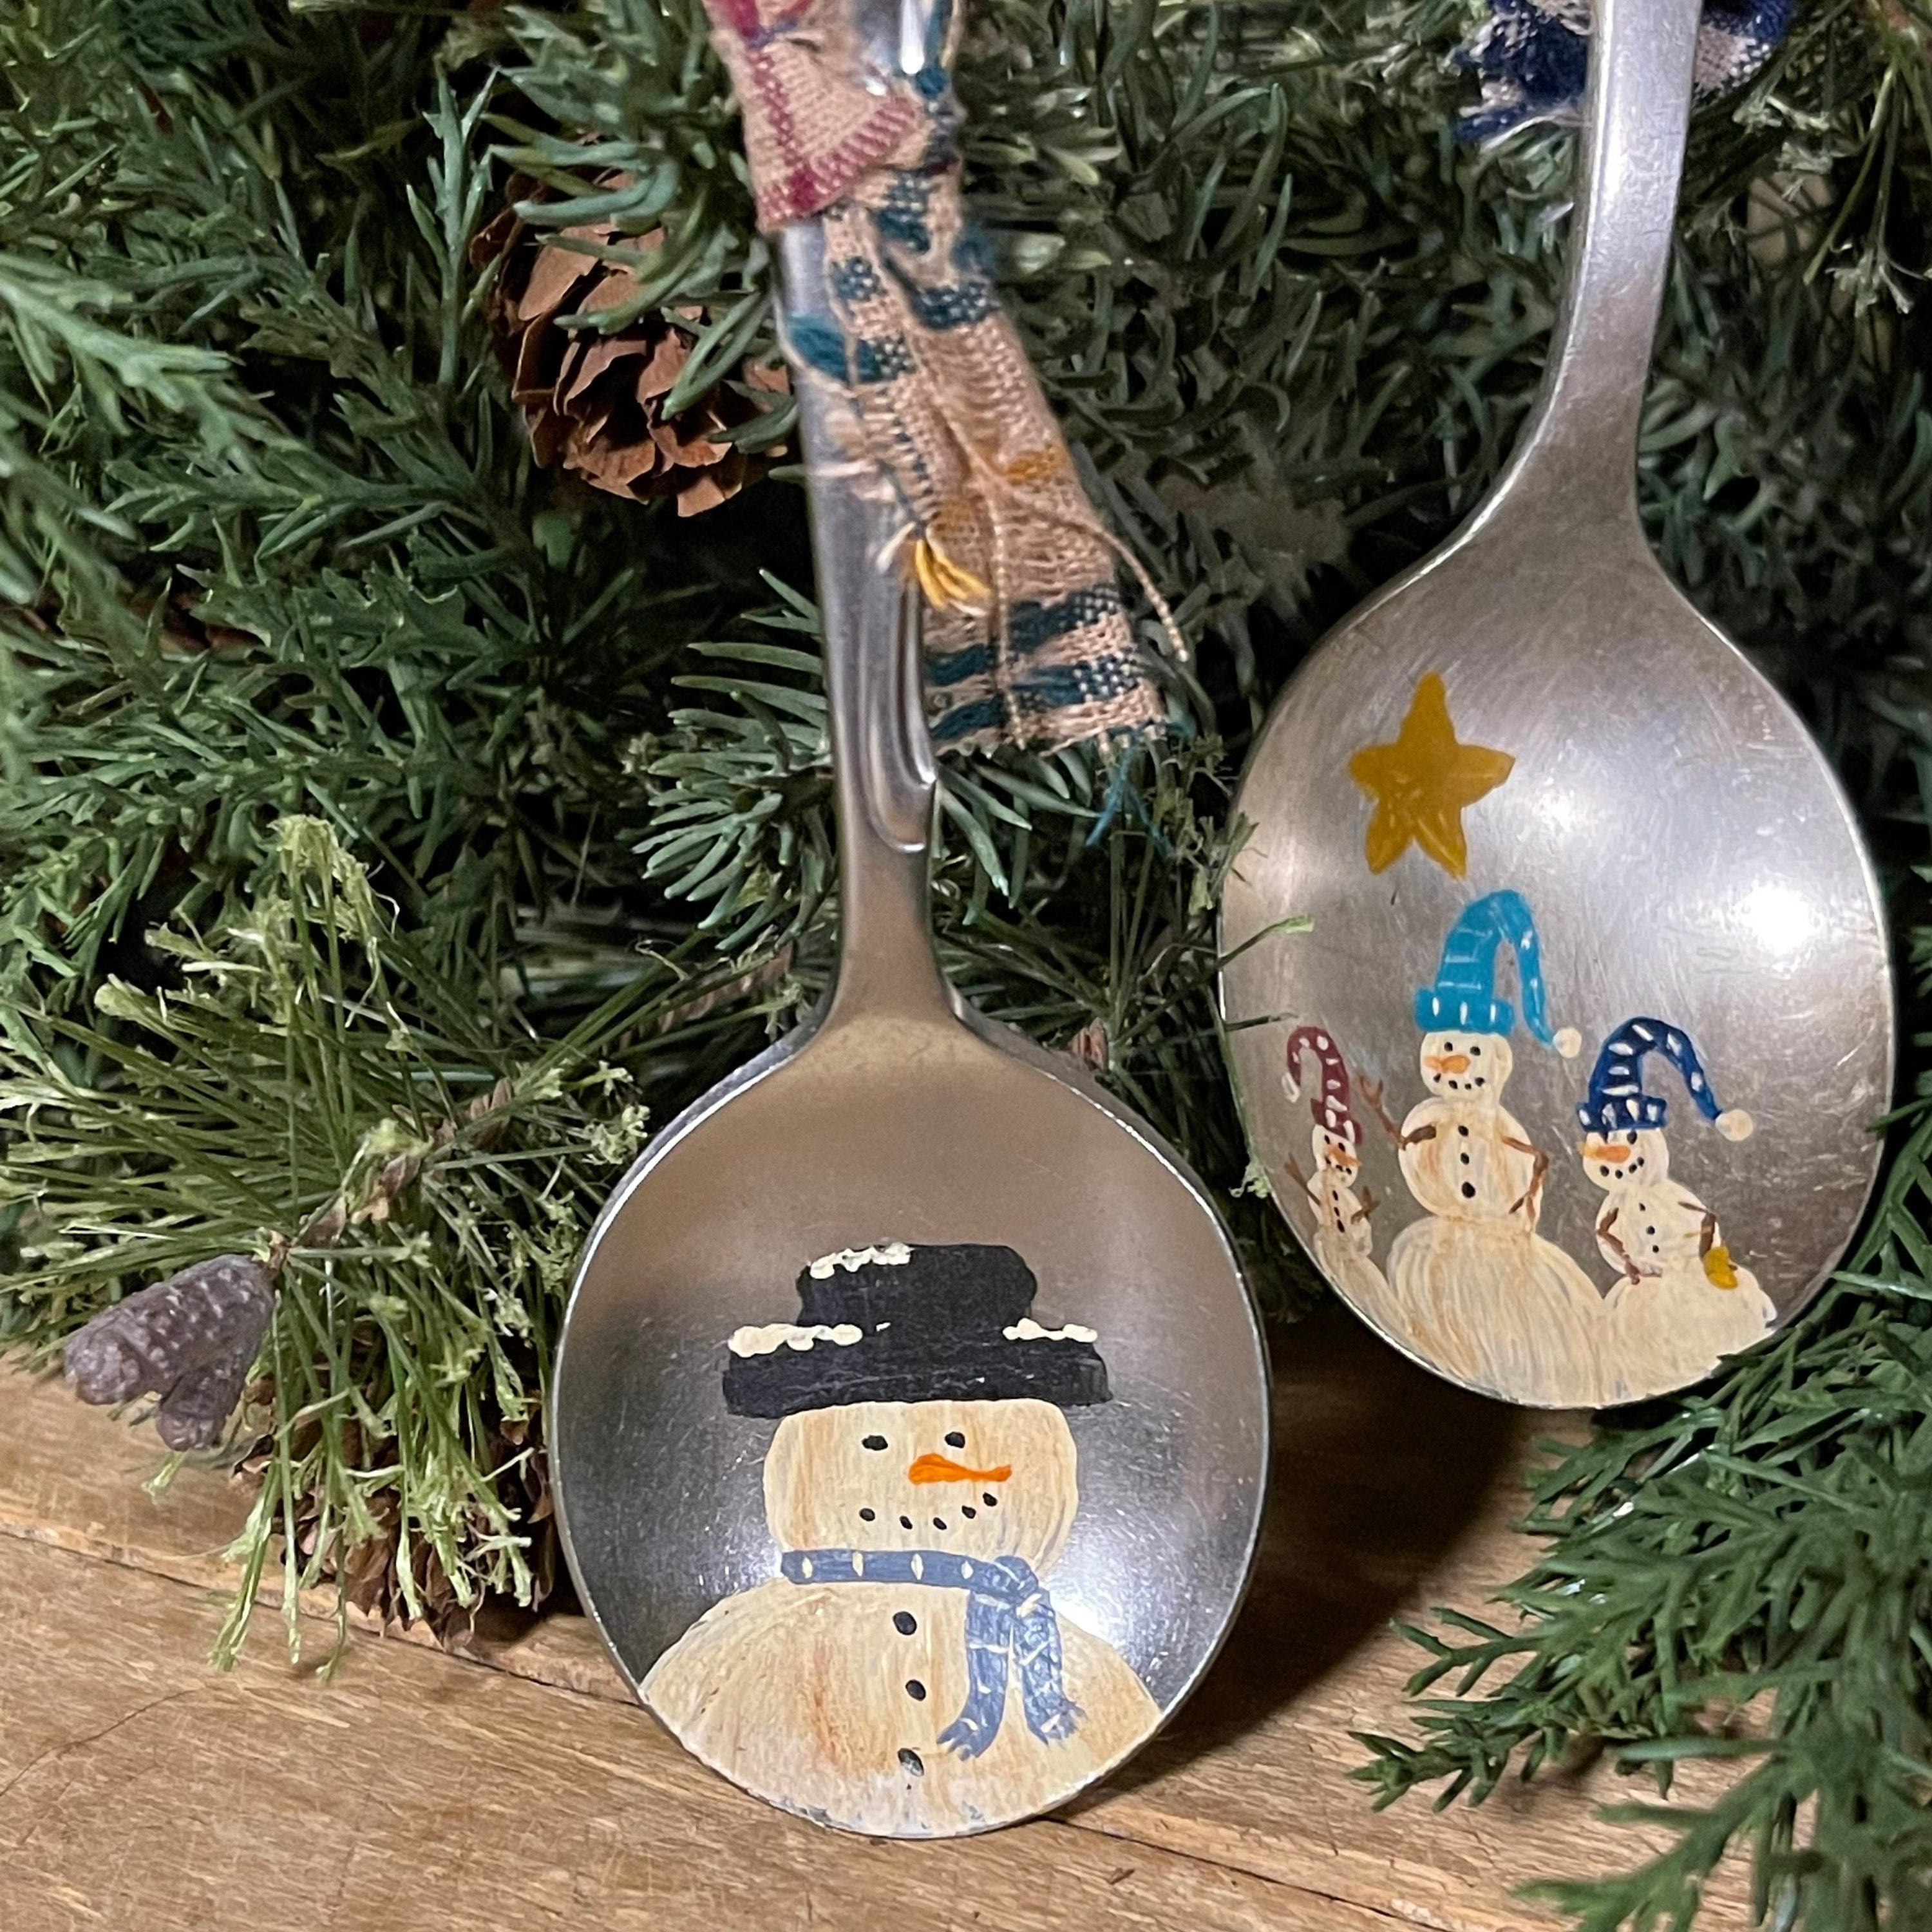 4 Christmas Measuring Spoons Glass Ornament by Place & Time